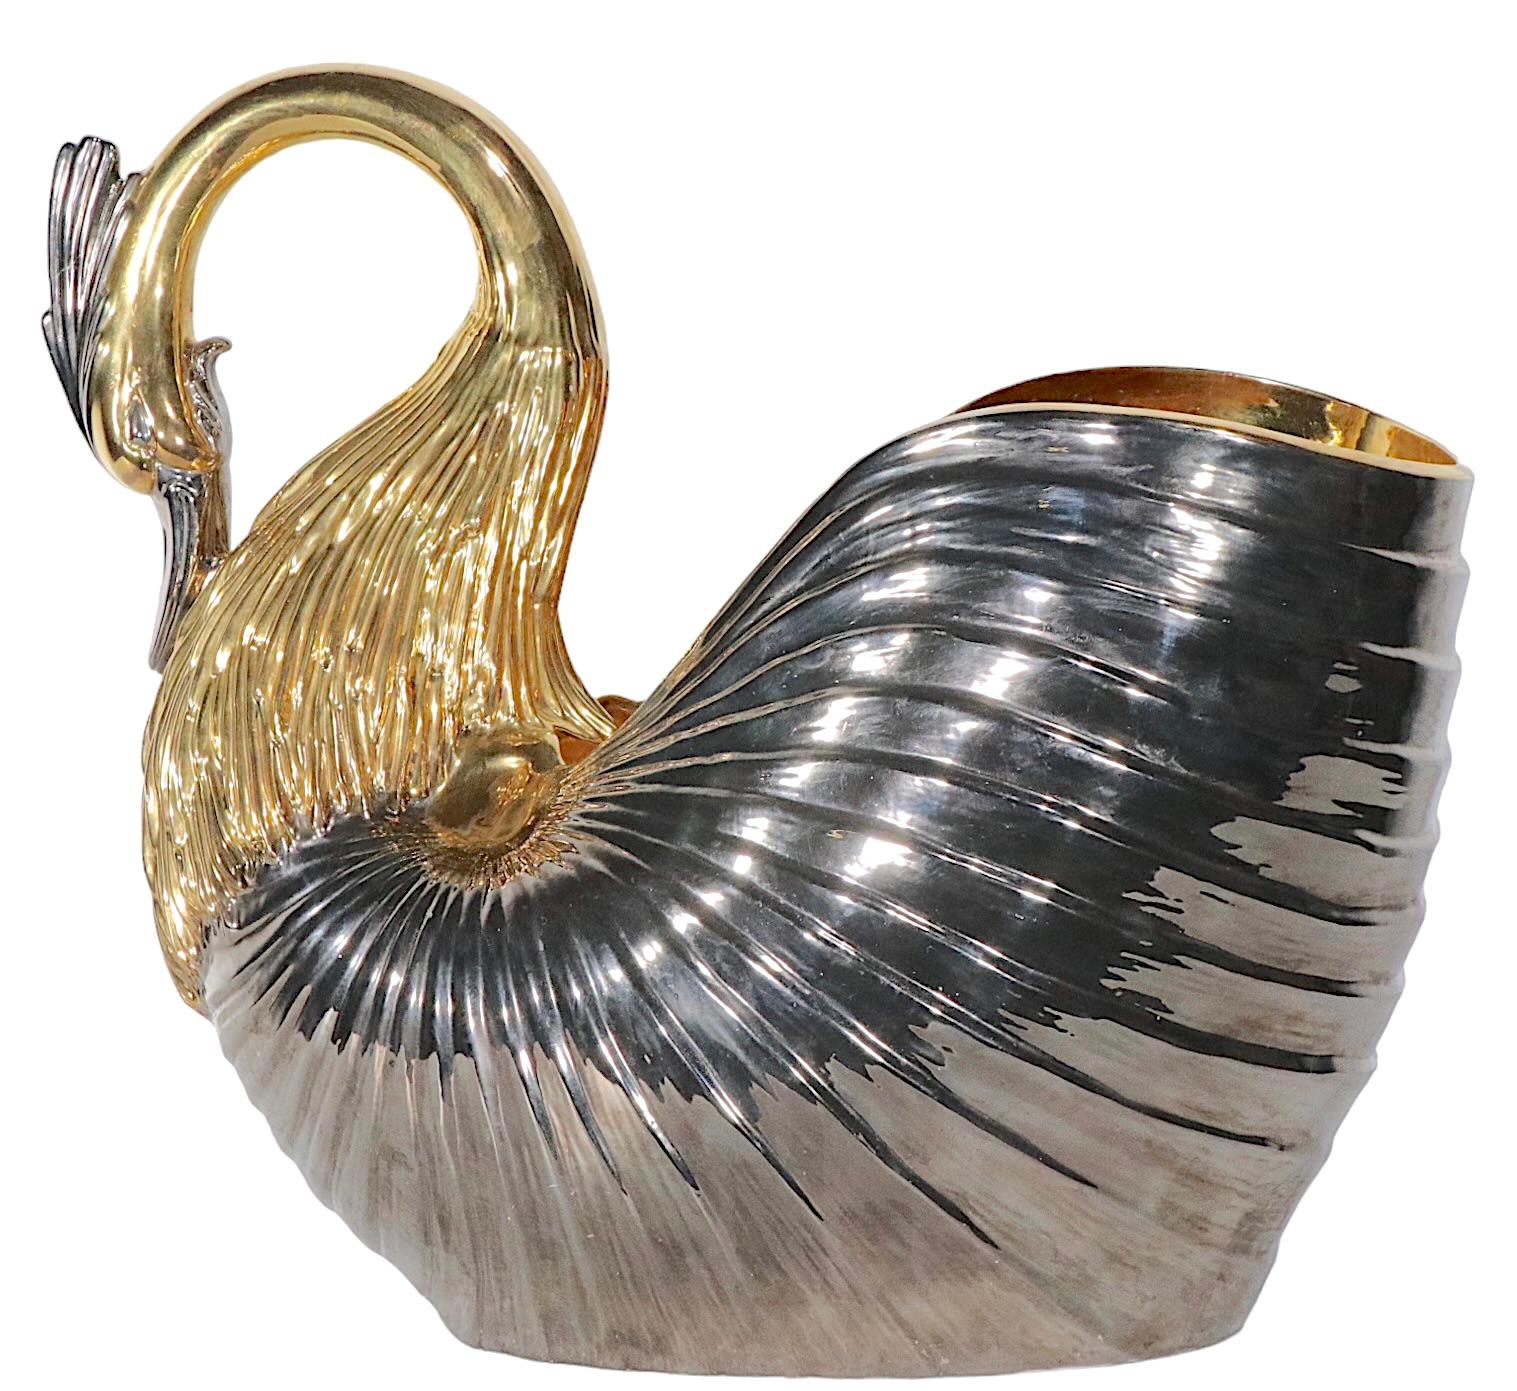 Stunning Italian Porcelain Ceramic Swan in Gold Luster and Dark Silver, c 1970s For Sale 5